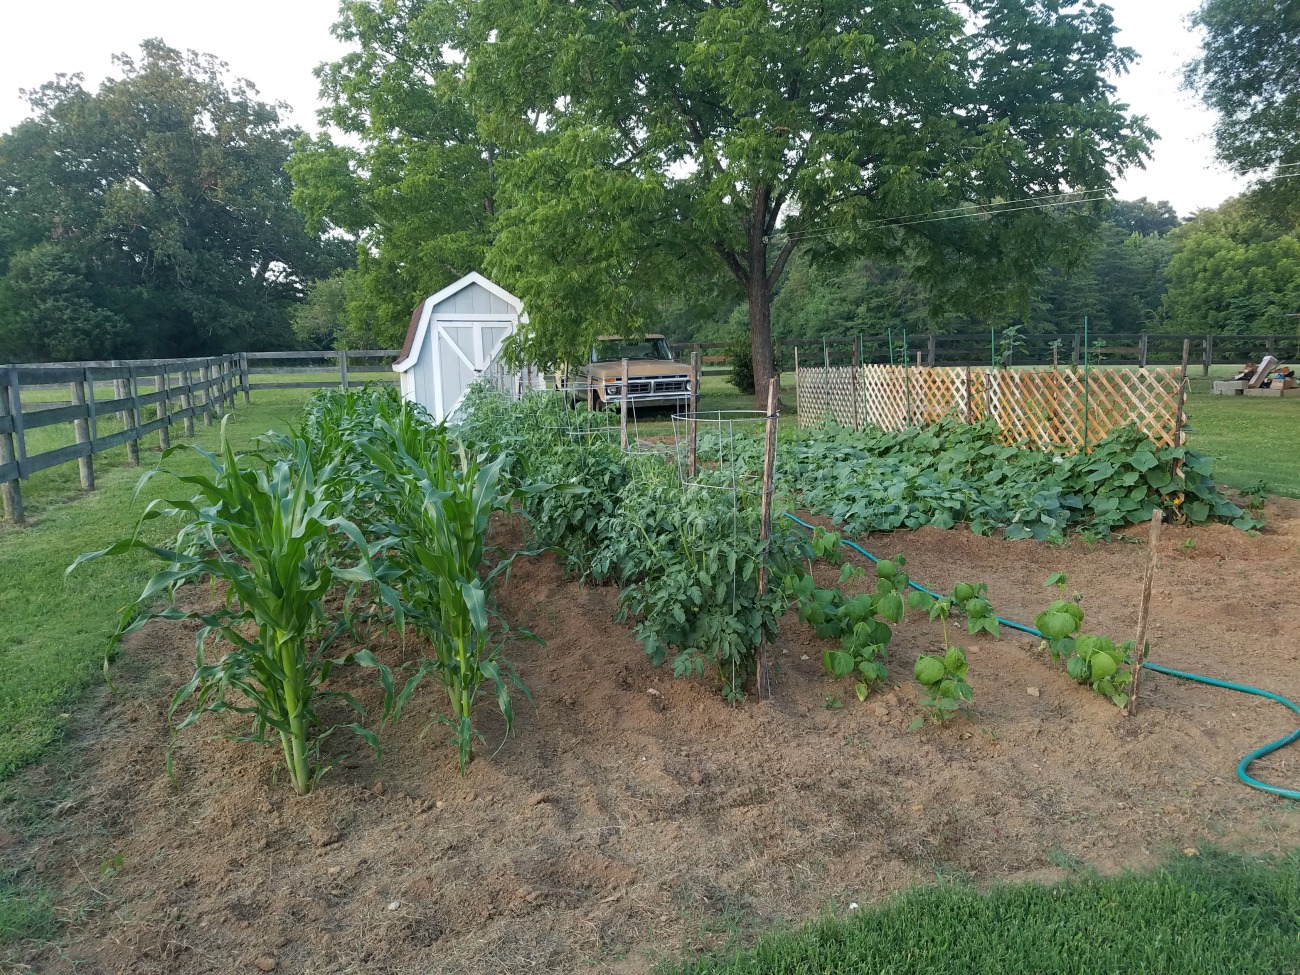 Vegetable garden with corn, heirloom tomatoes, cucumbers, and green beans.